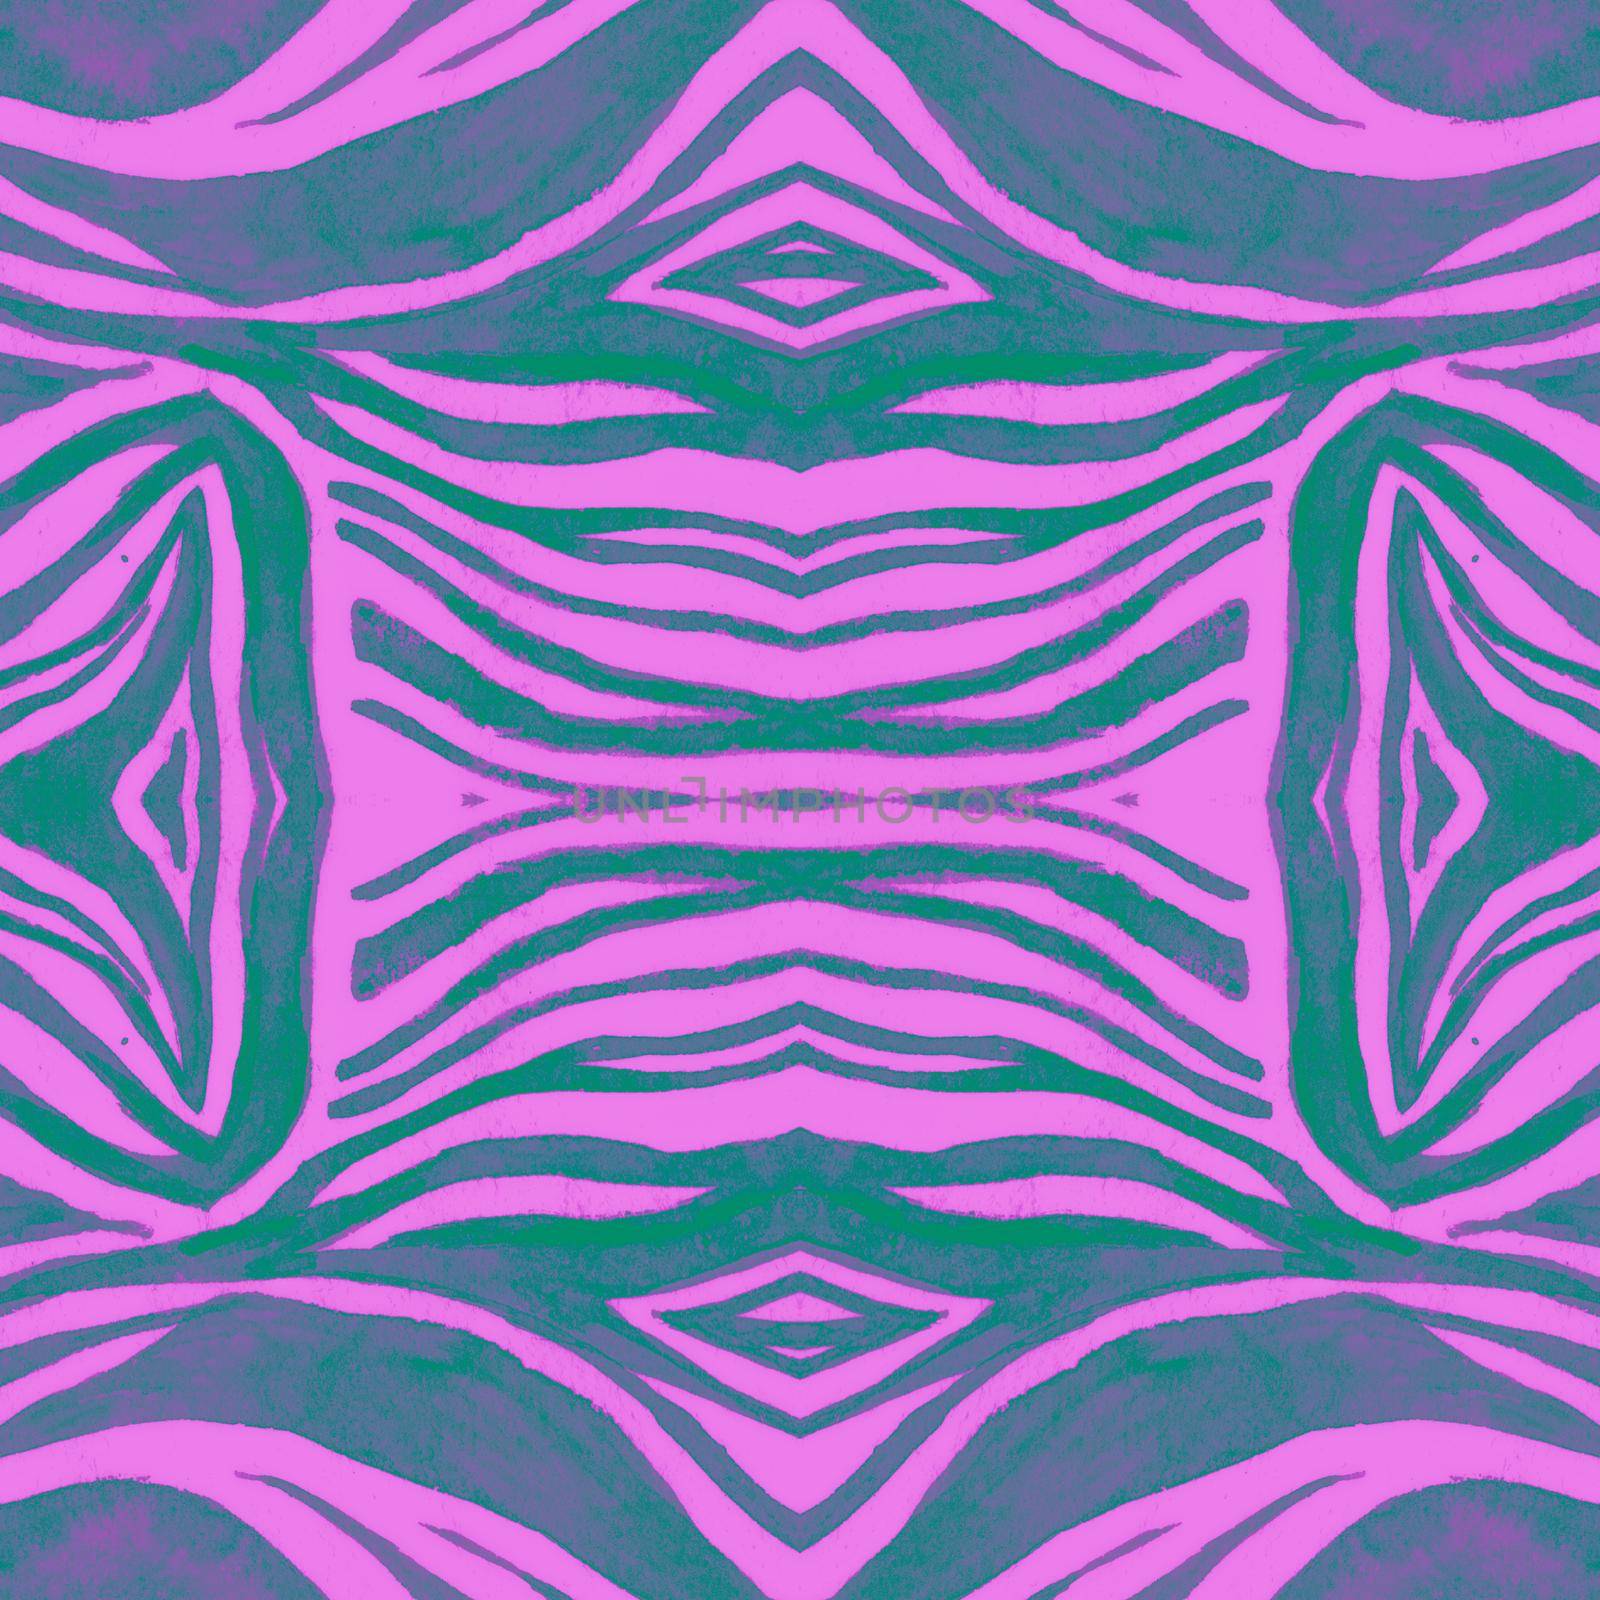 Seamless Animal Print. Fashion Tiger Texture. Violet Watercolor Lines. Seamless African Ornament. Zebra Skin. Abstract Tiger Texture. Watercolor Design. Seamless Pink Cheetah Wallpaper.